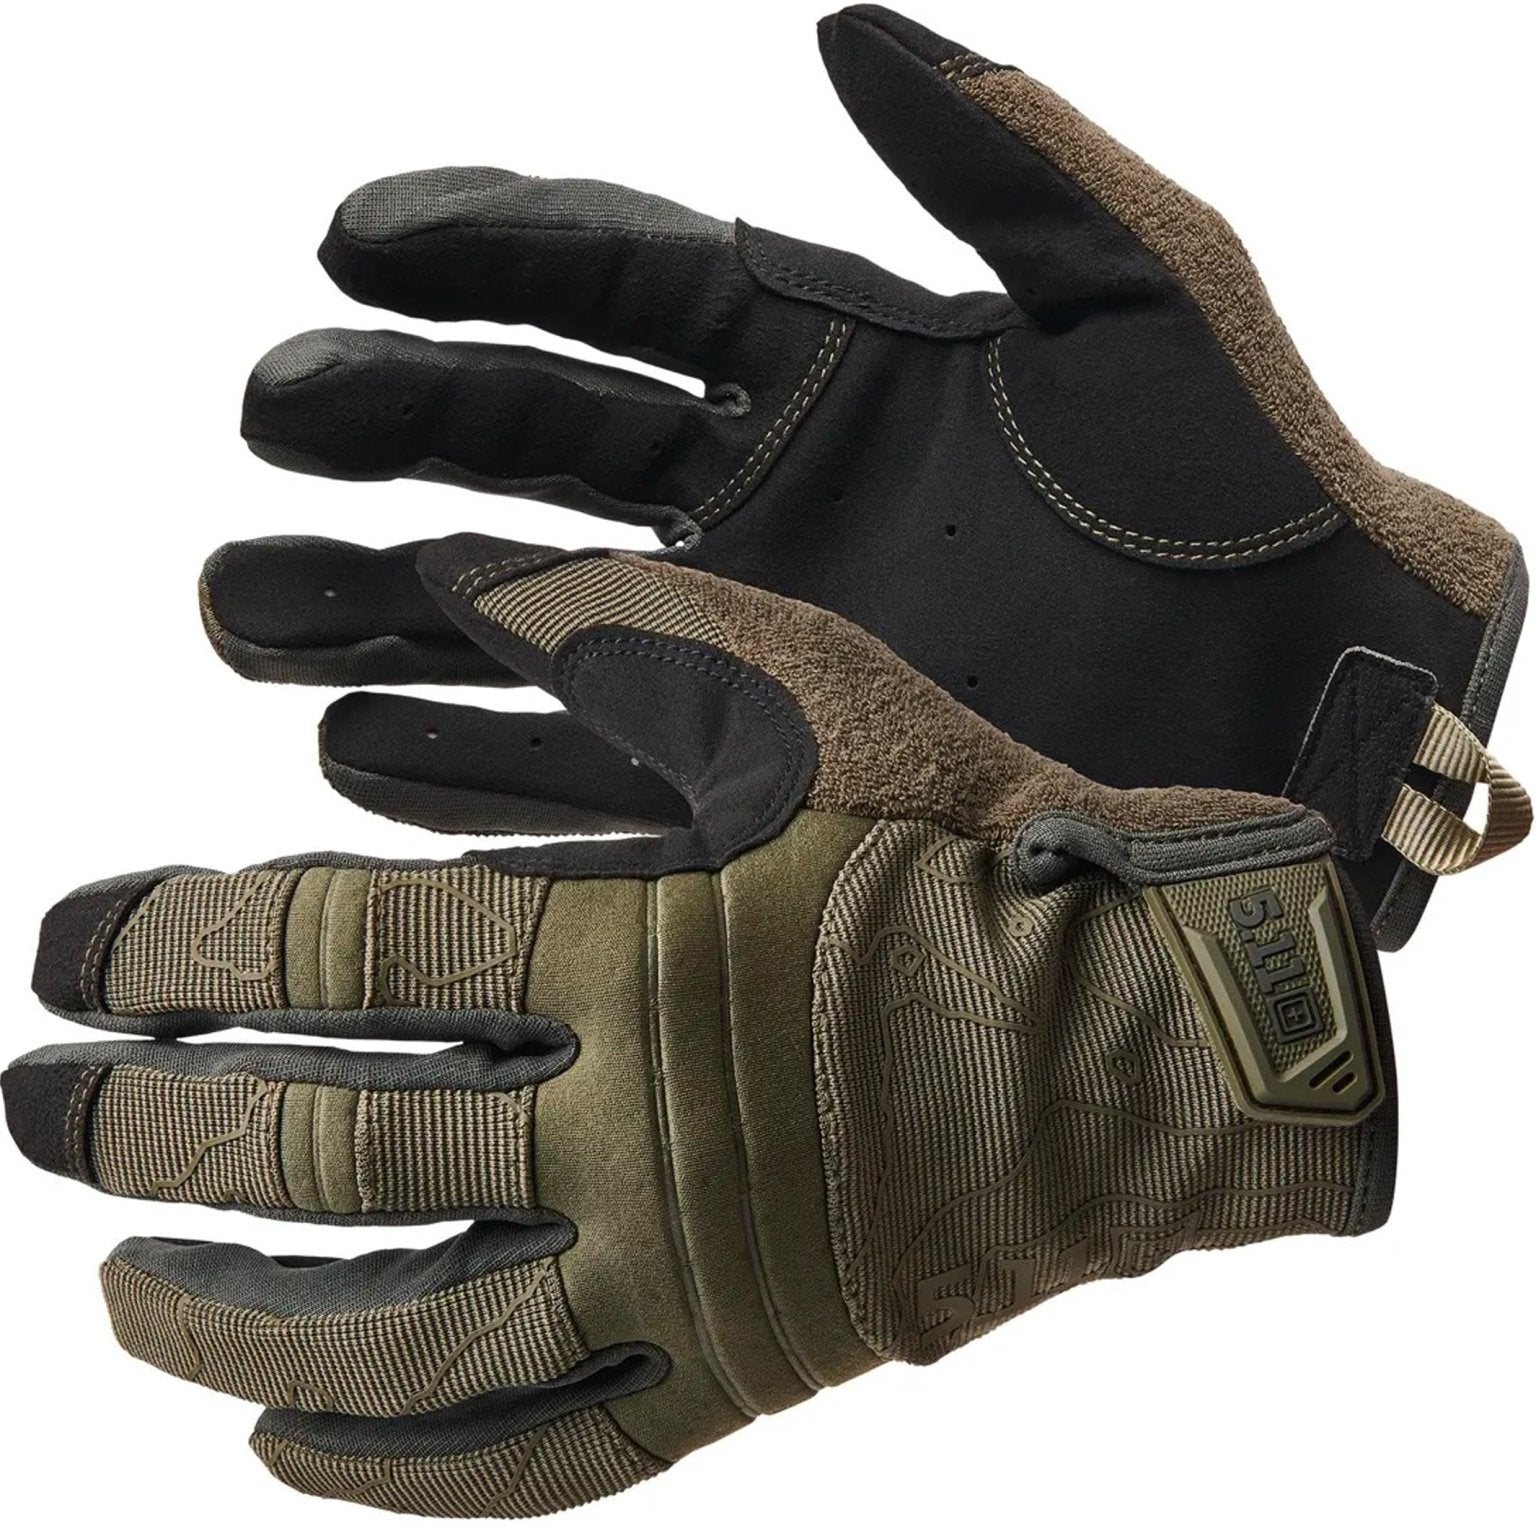 4elementsclothing5.11 Tactical5.11 Tactical - 5.11 COMPETITION SHOOTING 2.0 GLOVE - Touchscreen taper wrap gloves, Nylon EN388:2016- 3111X; EN ISO 21420 - Style 59394Gloves59394-186-S